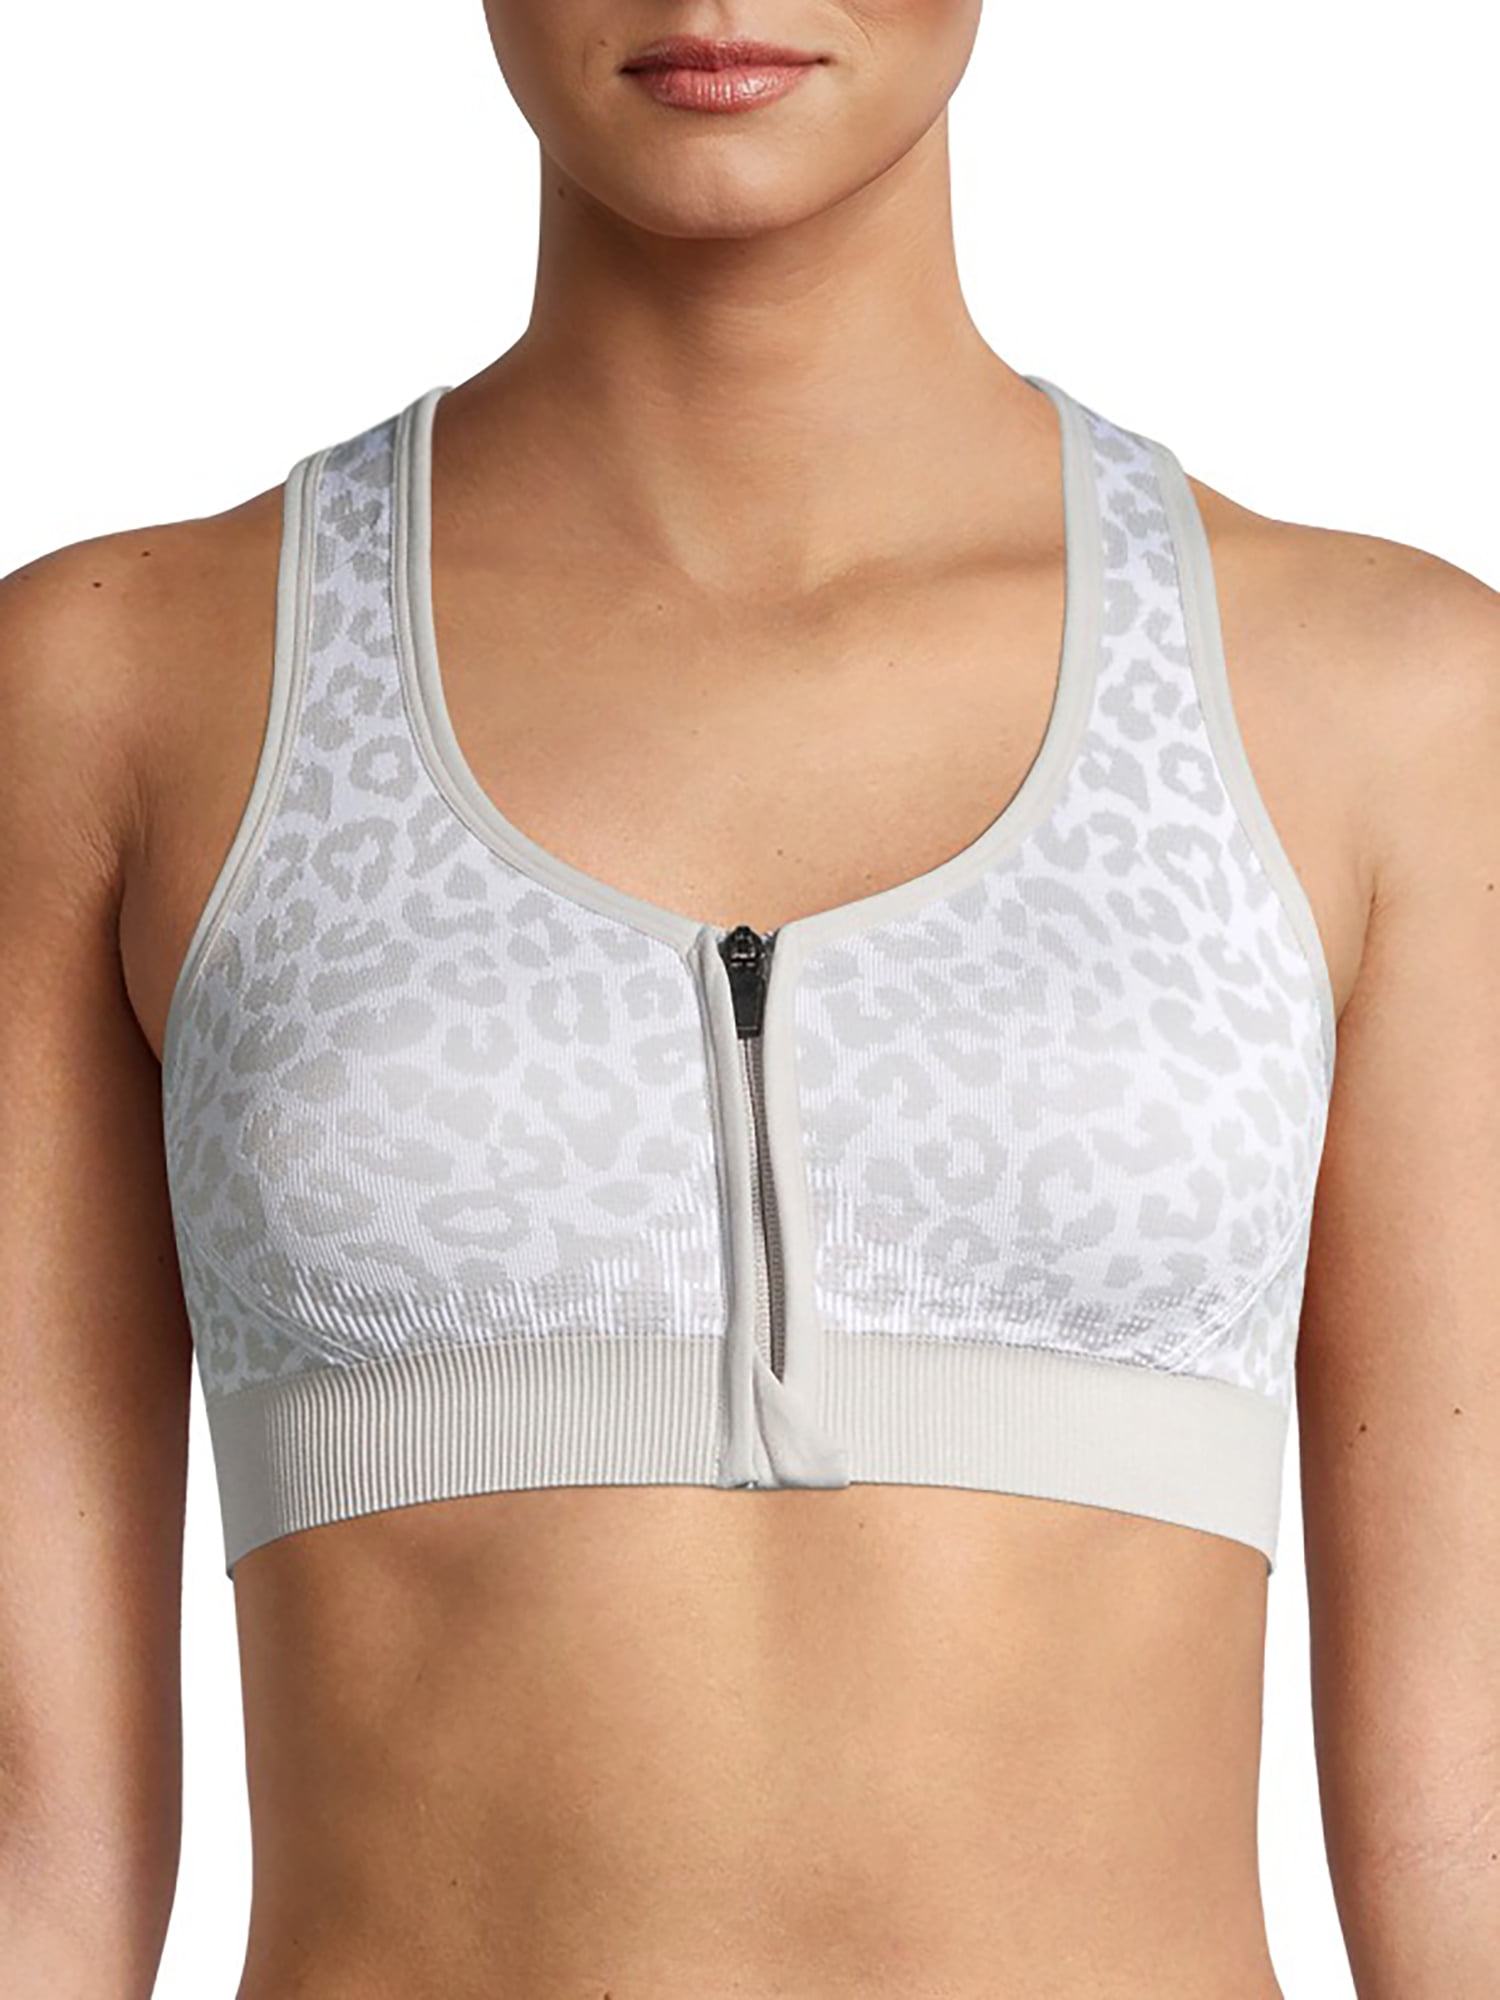 Avia Beige Zip Front Sports Bra Size XL - $8 New With Tags - From